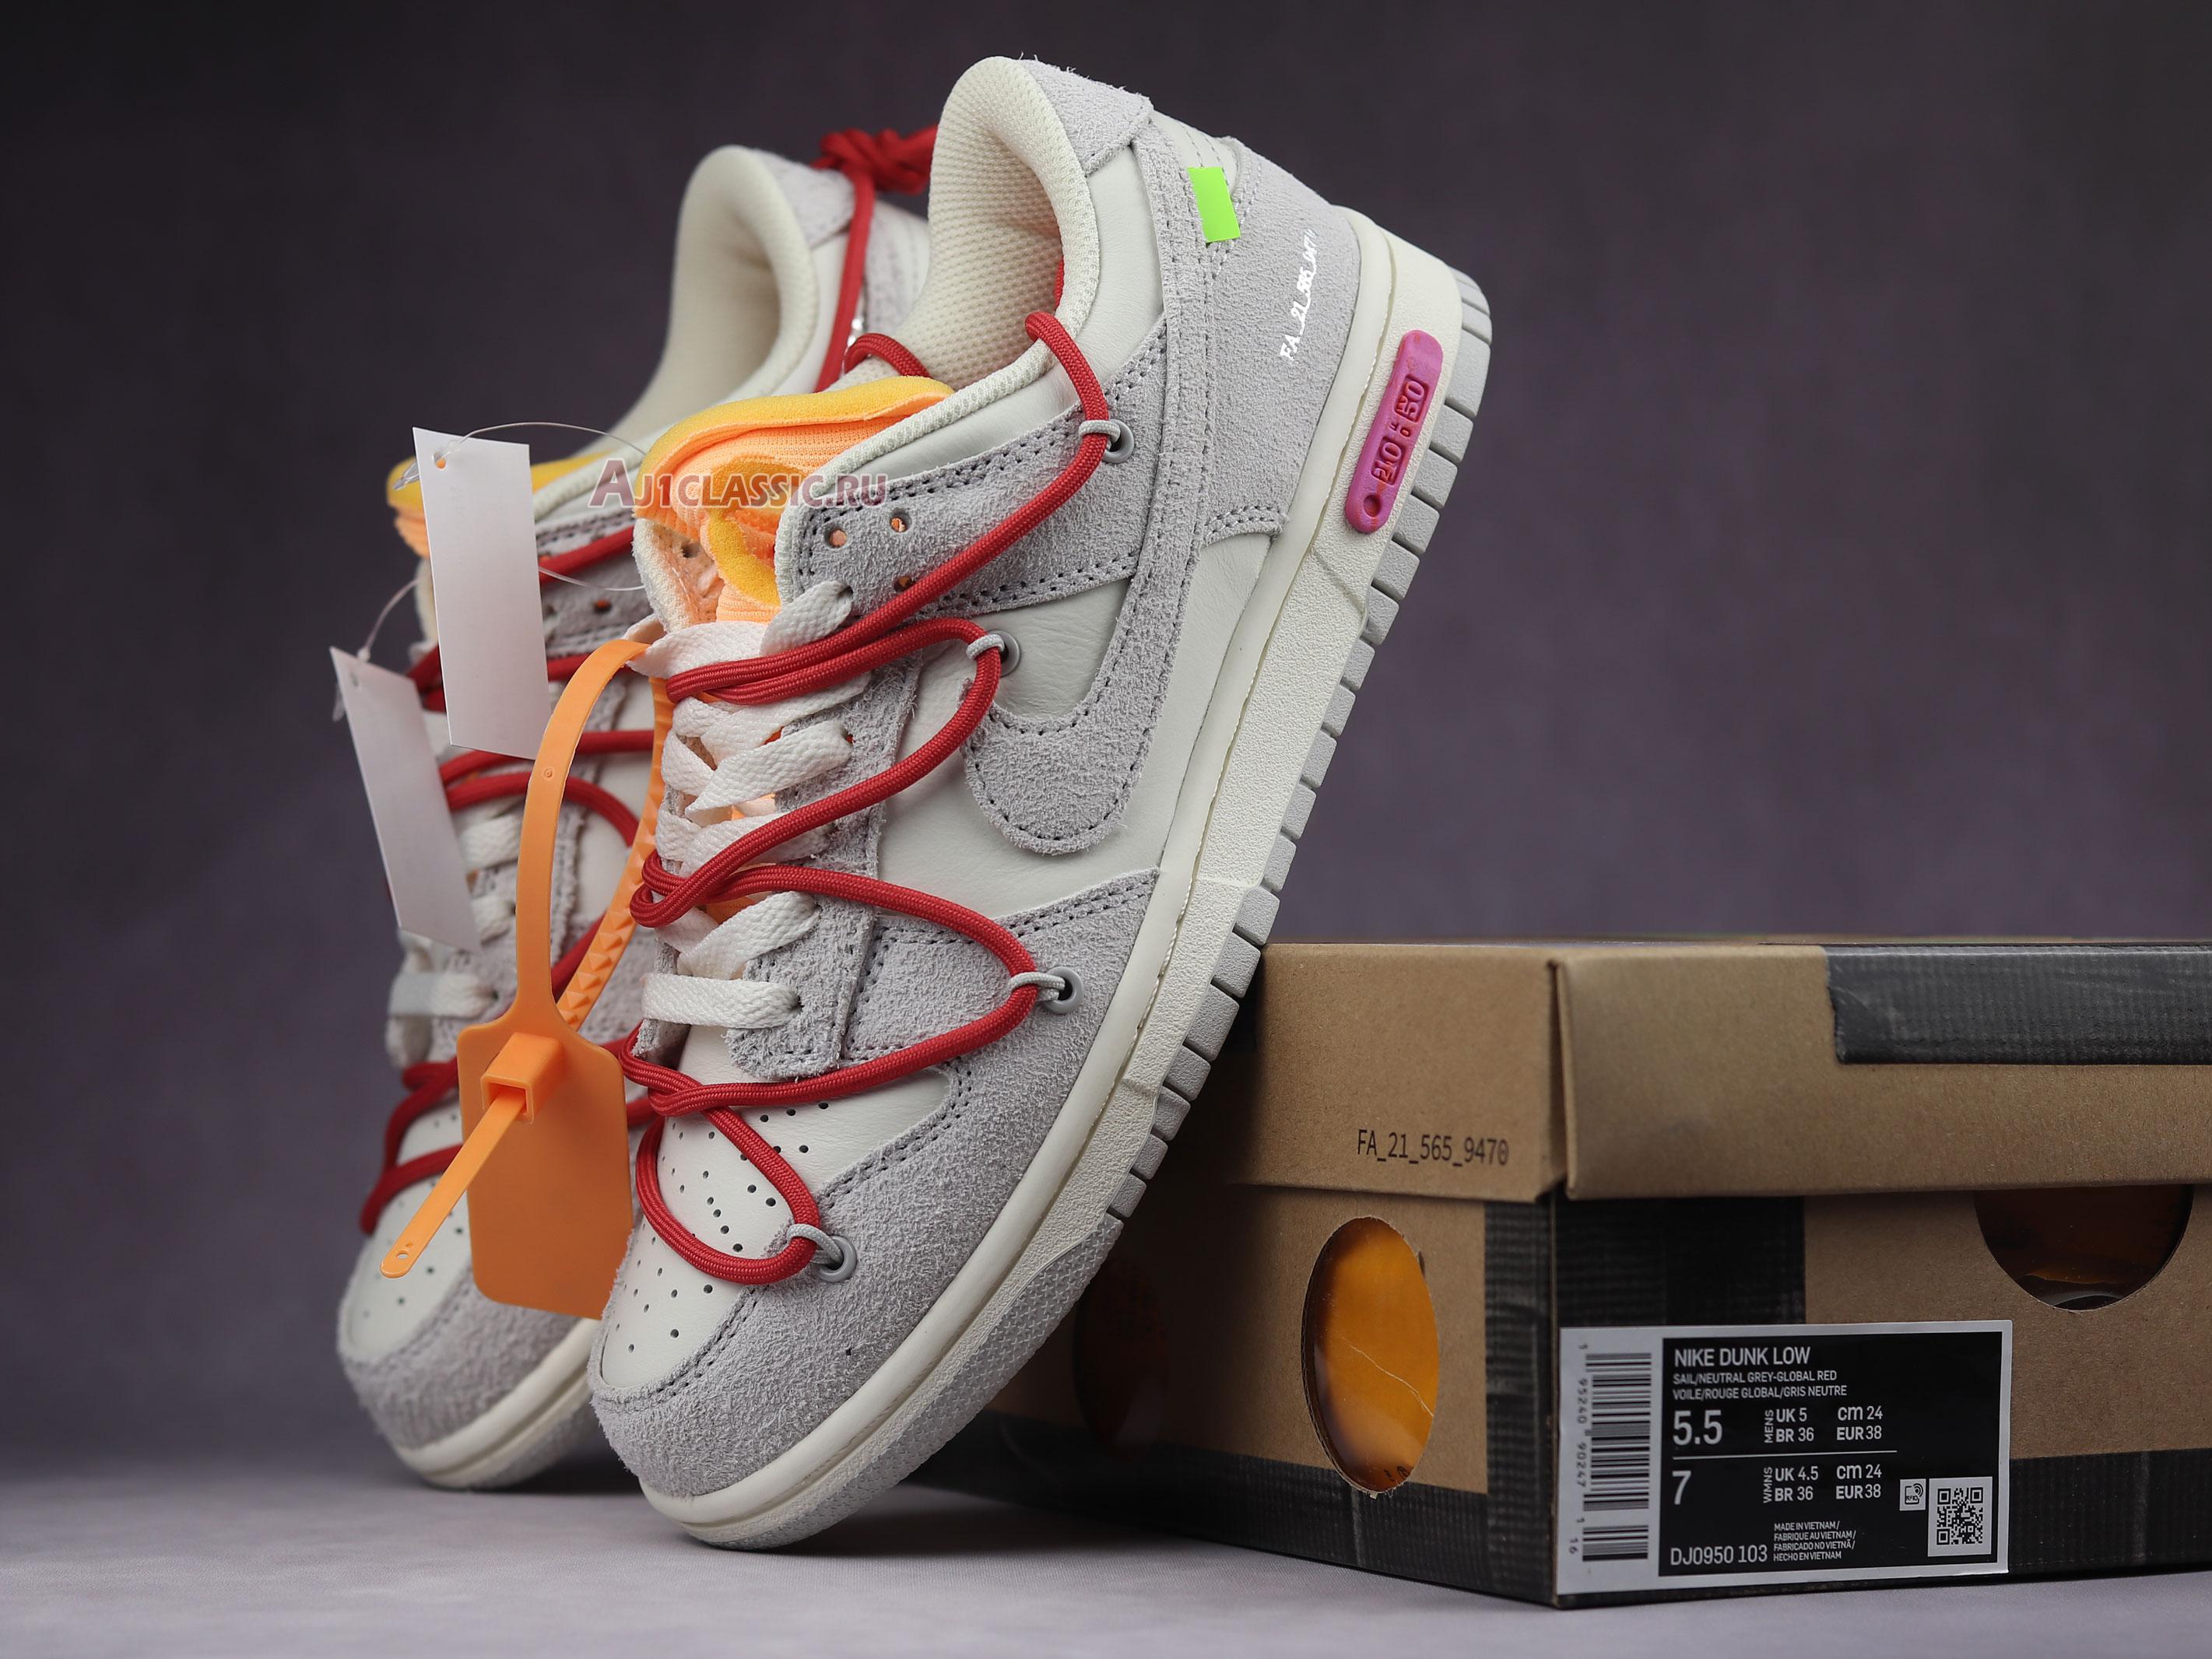 Off-White x Nike Dunk Low "Lot 40 of 50" DJ0950-103